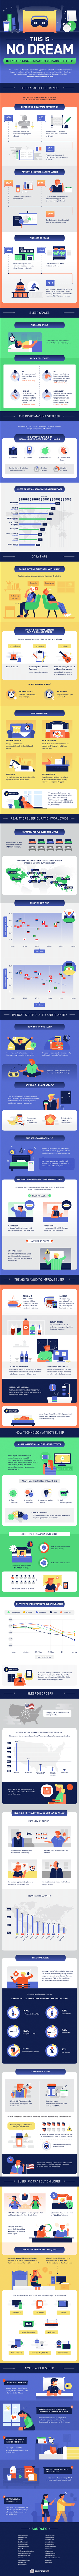 80 Eye-Opening Stats & Facts About Sleep